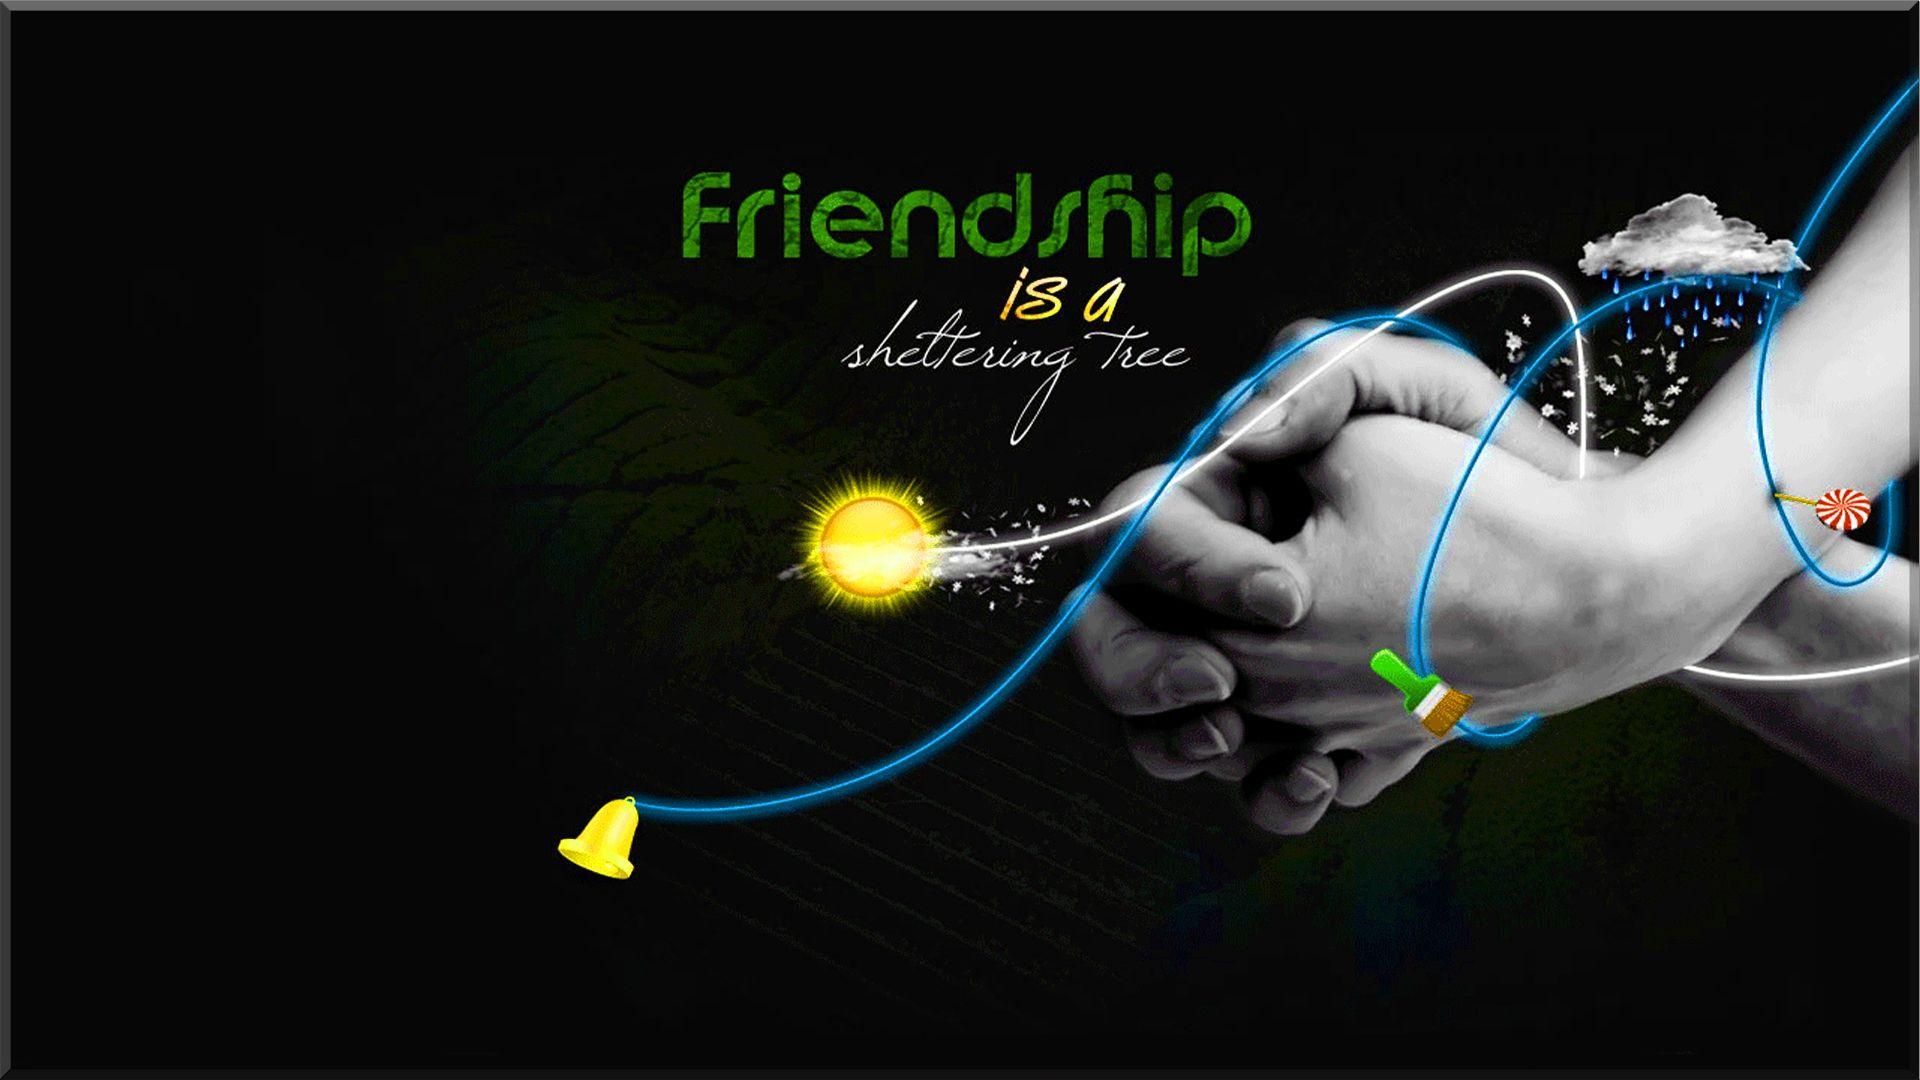 Friendship Quotes HD Wallpaper, High Definition, High